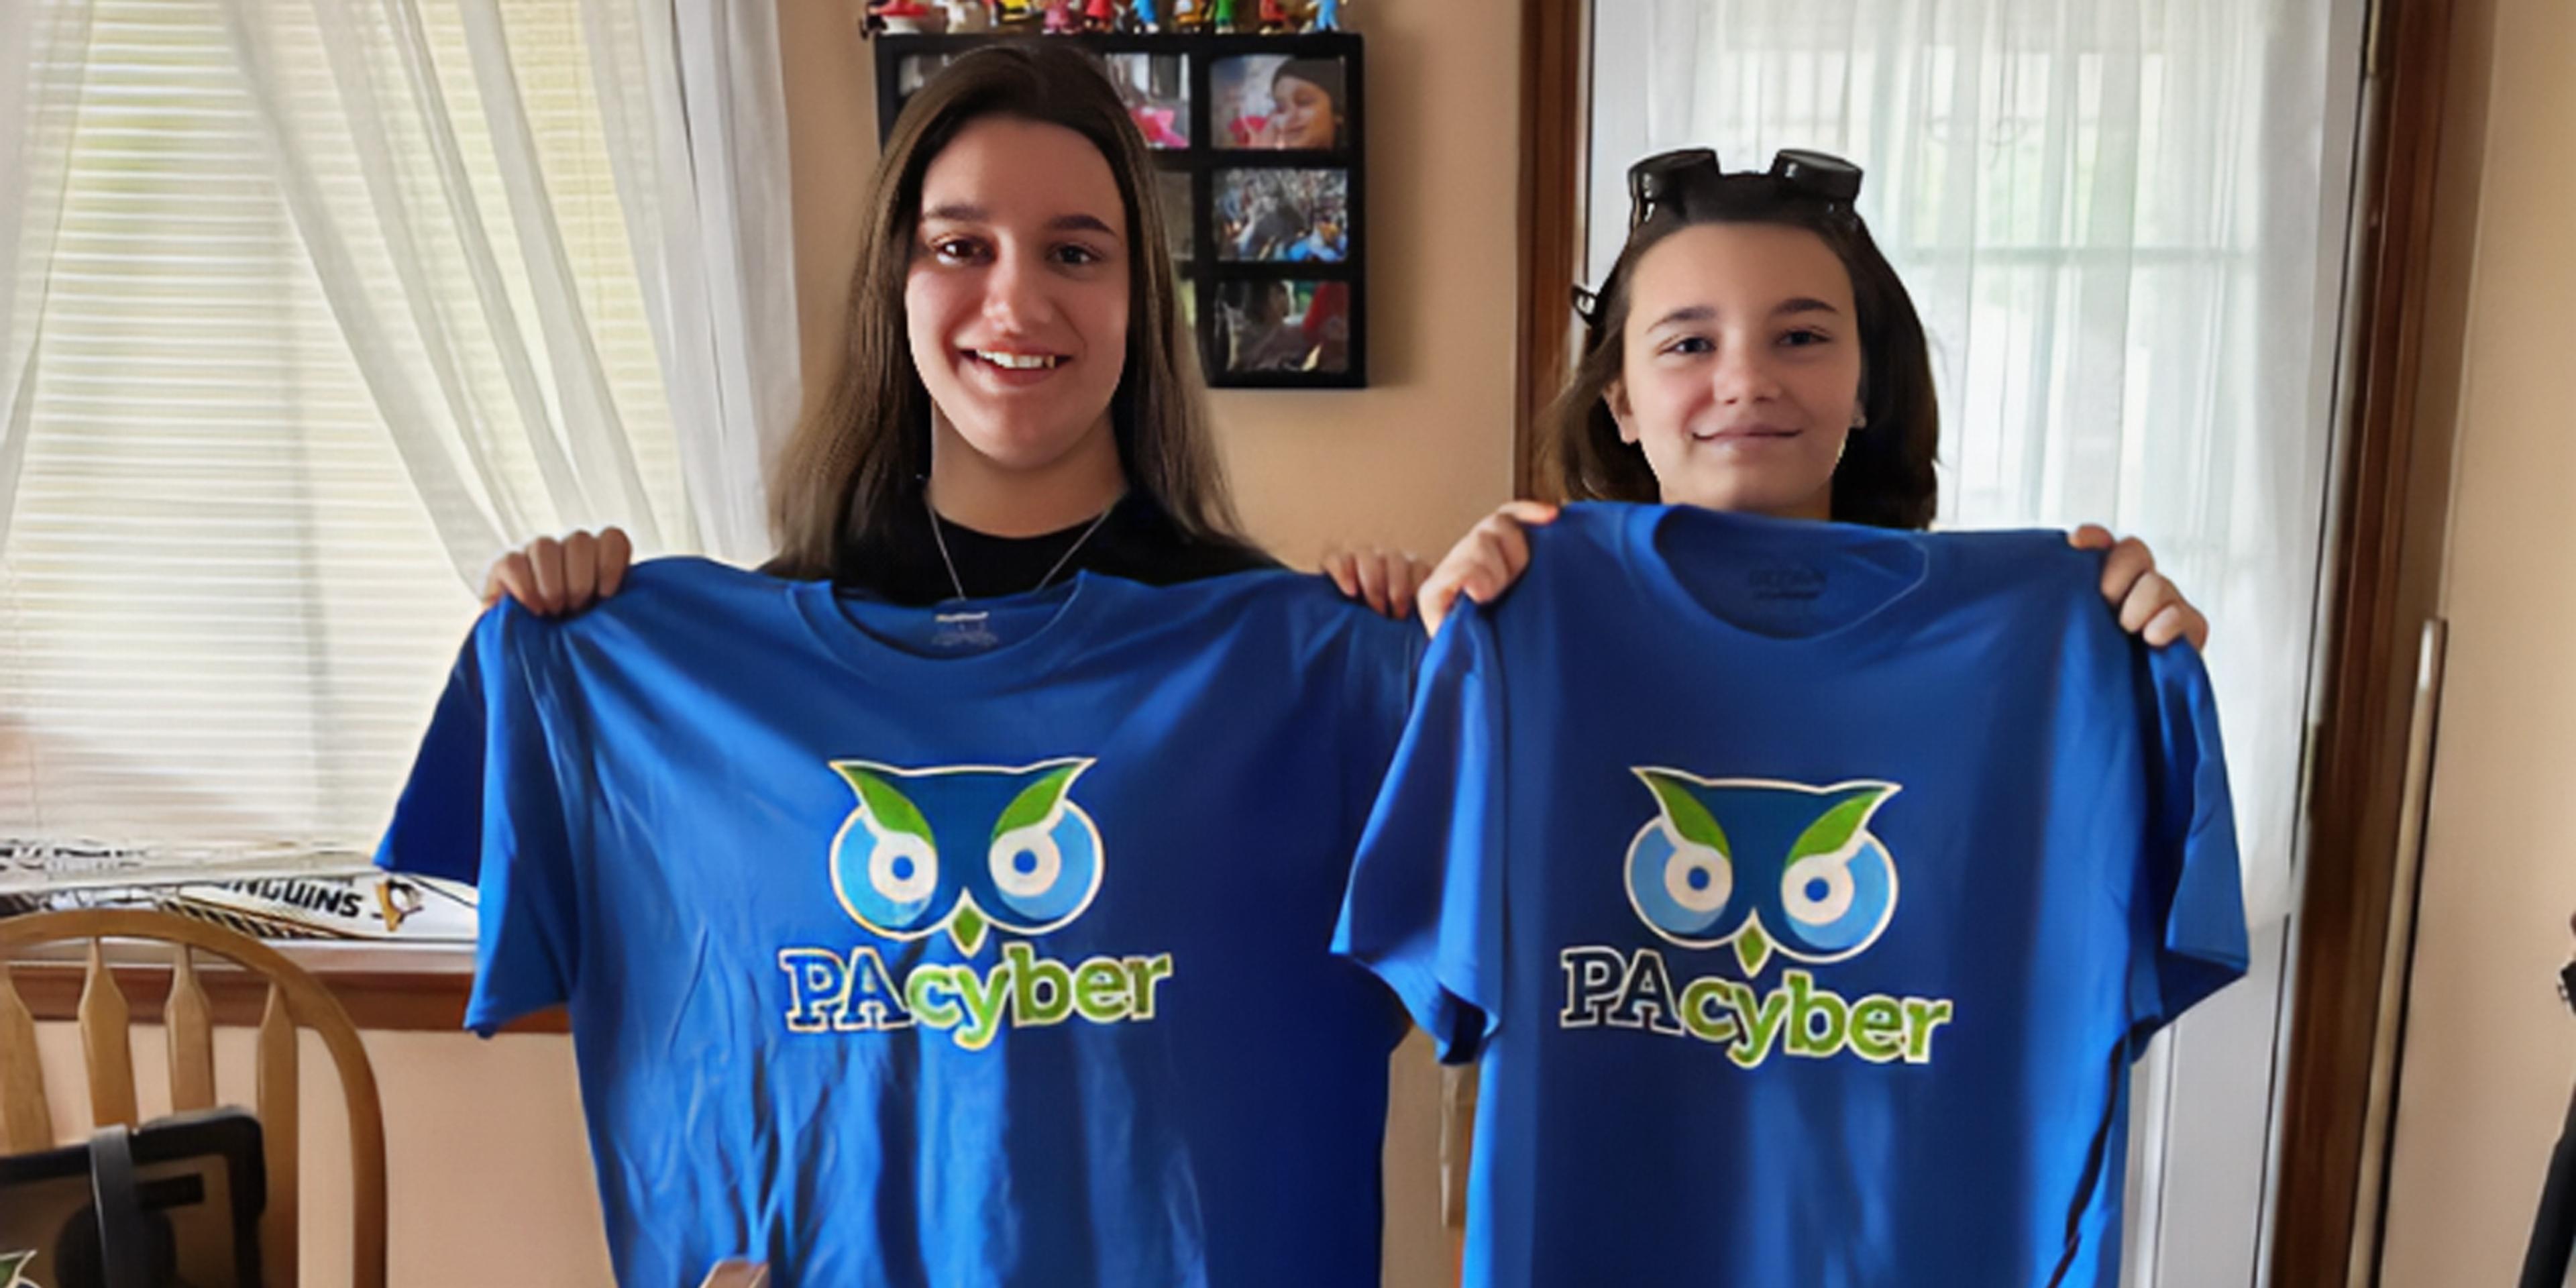 PA Cyber Students with PA Cyber Shirts